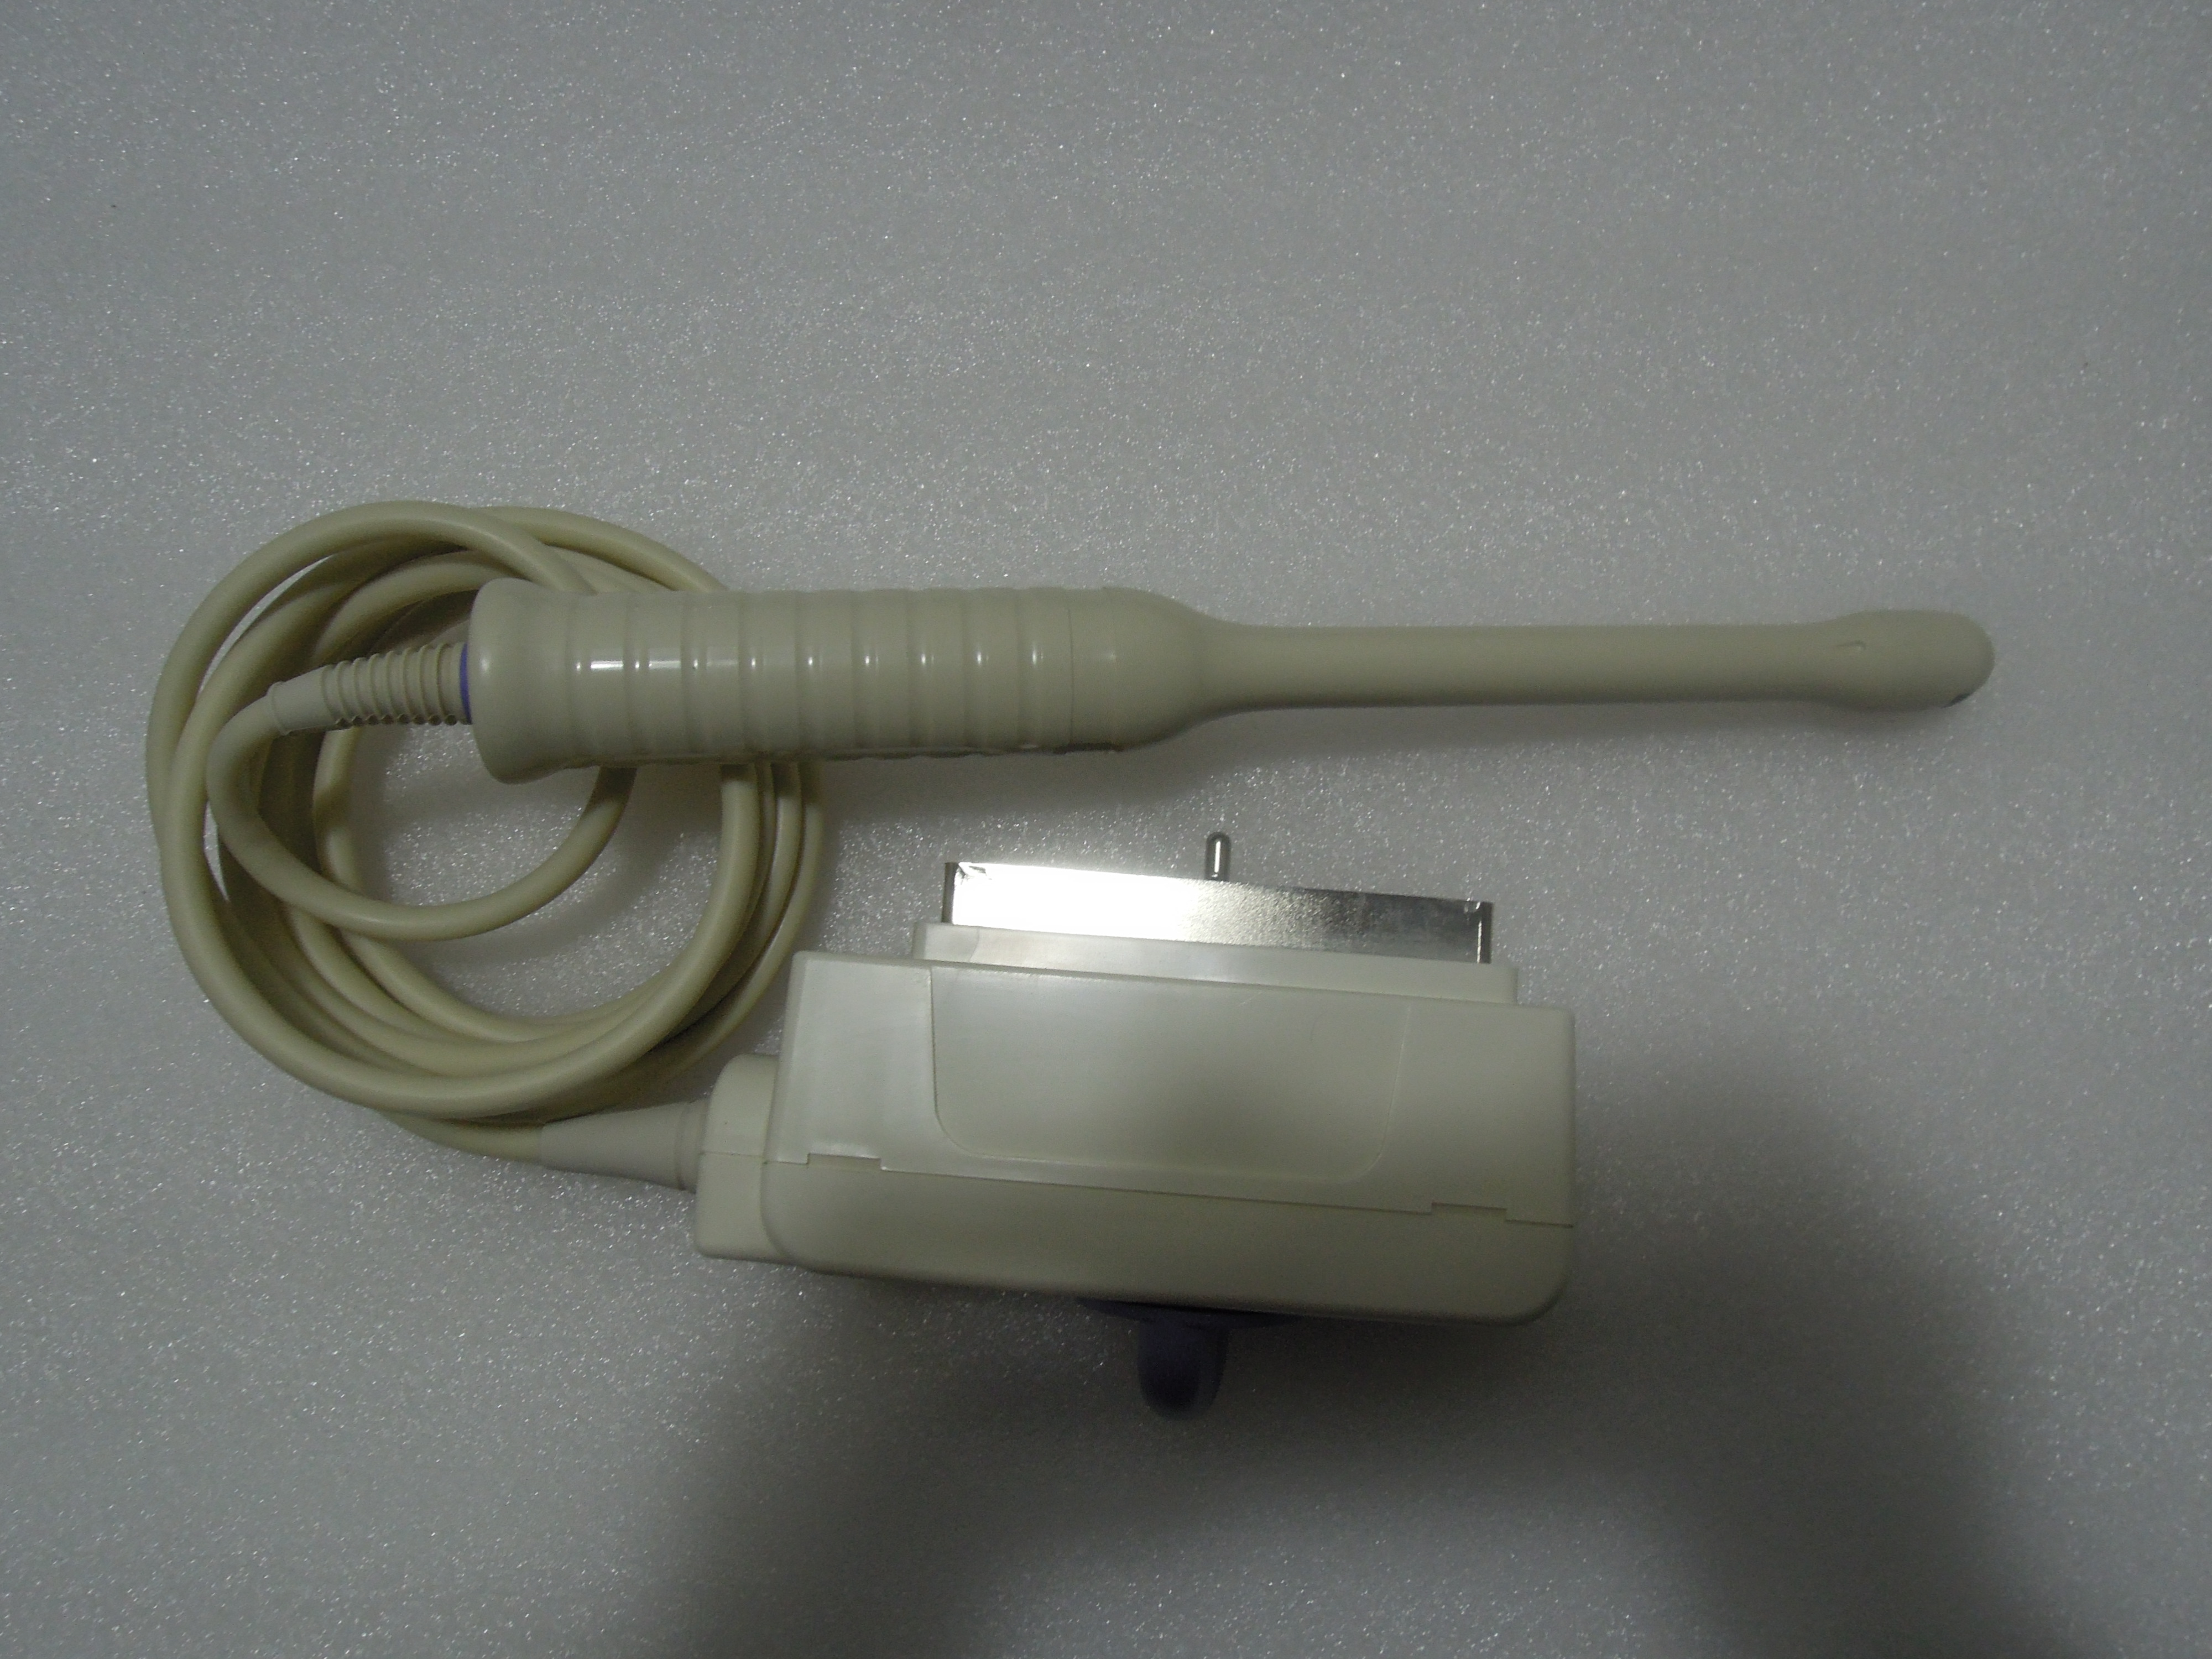 Aloka UST-9124 Multi Frequency Convex Endovaginal 9 mm Transducer